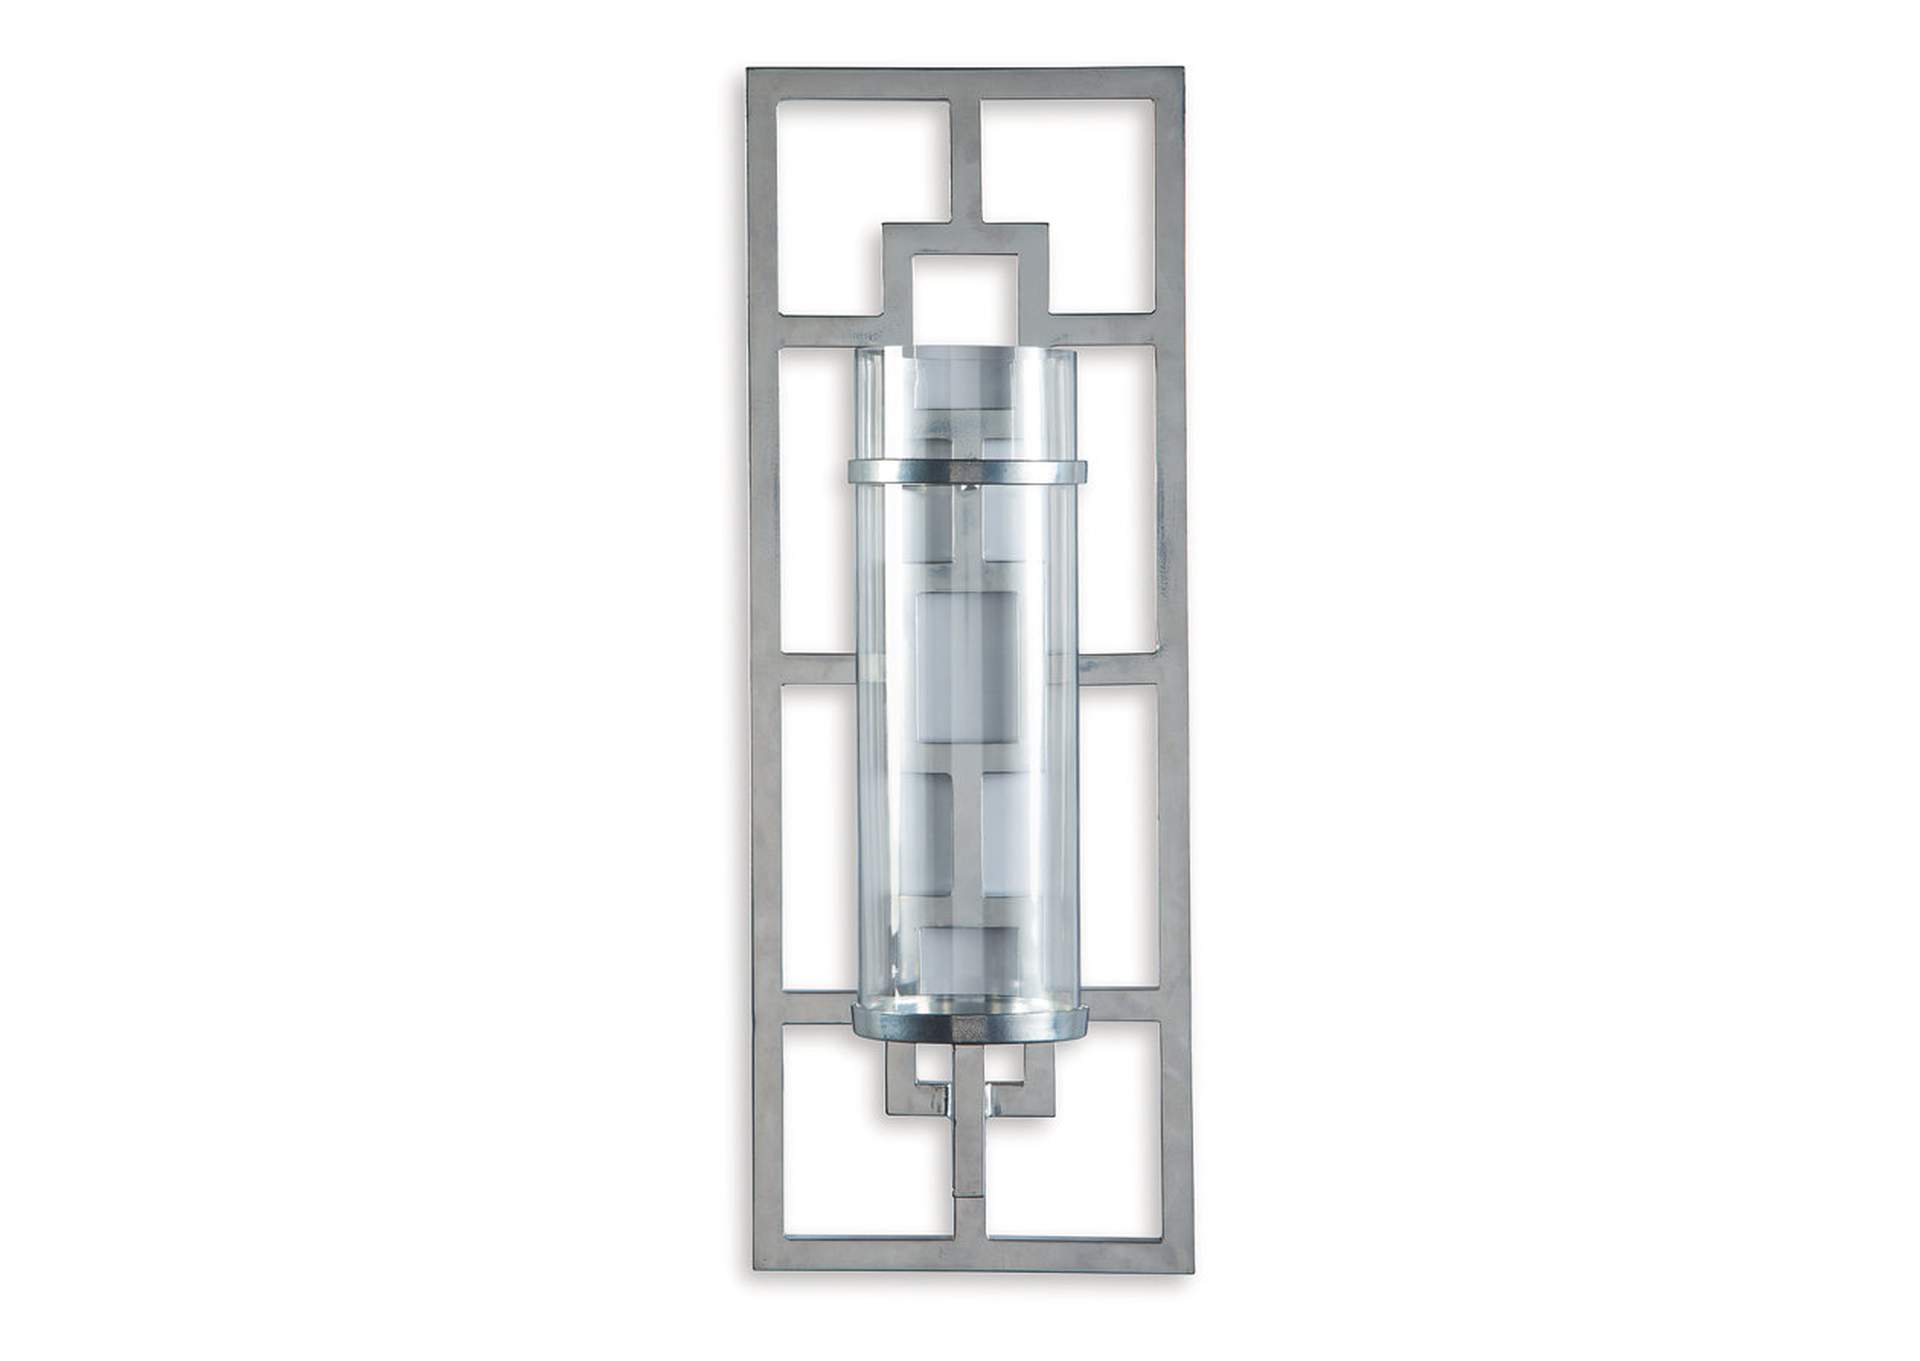 Brede Wall Sconce,Direct To Consumer Express